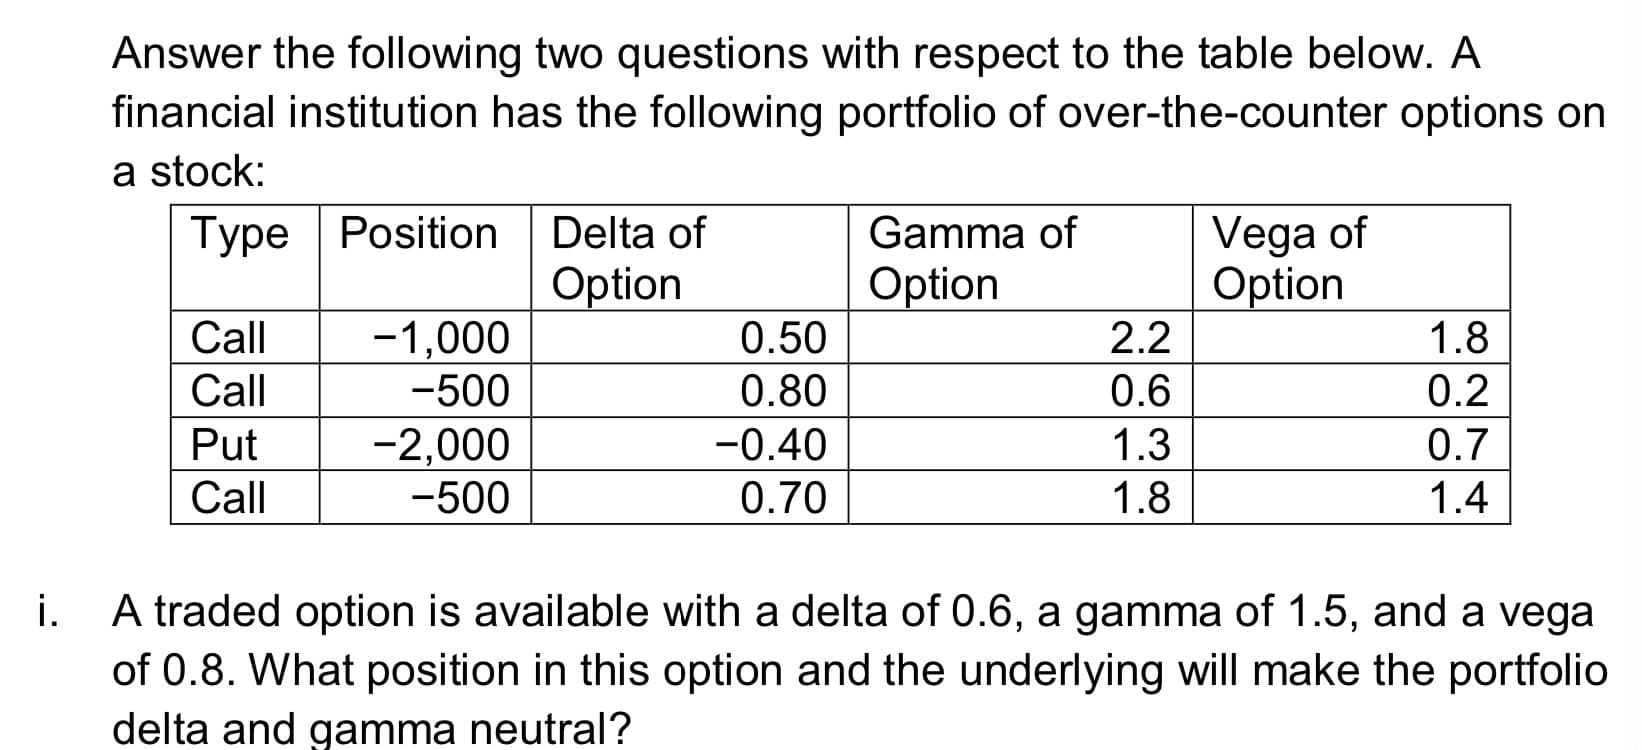 Answer the following two questions with respect to the table below. A
financial institution has the following portfolio of over-the-counter options on
a stock:
Vega of
Option
Туре Рosition
Delta of
Gamma of
Option
Option
0.50
Call
-1,000
-500
2.2
1.8
Call
0.80
0.6
0.2
Put
-2,000
-500
-0.40
1.3
0.7
Call
0.70
1.8
1.4
A traded option is available with a delta of 0.6, a gamma of 1.5, and a vega
of 0.8. What position in this option and the underlying will make the portfolio
delta and gamma neutral?
